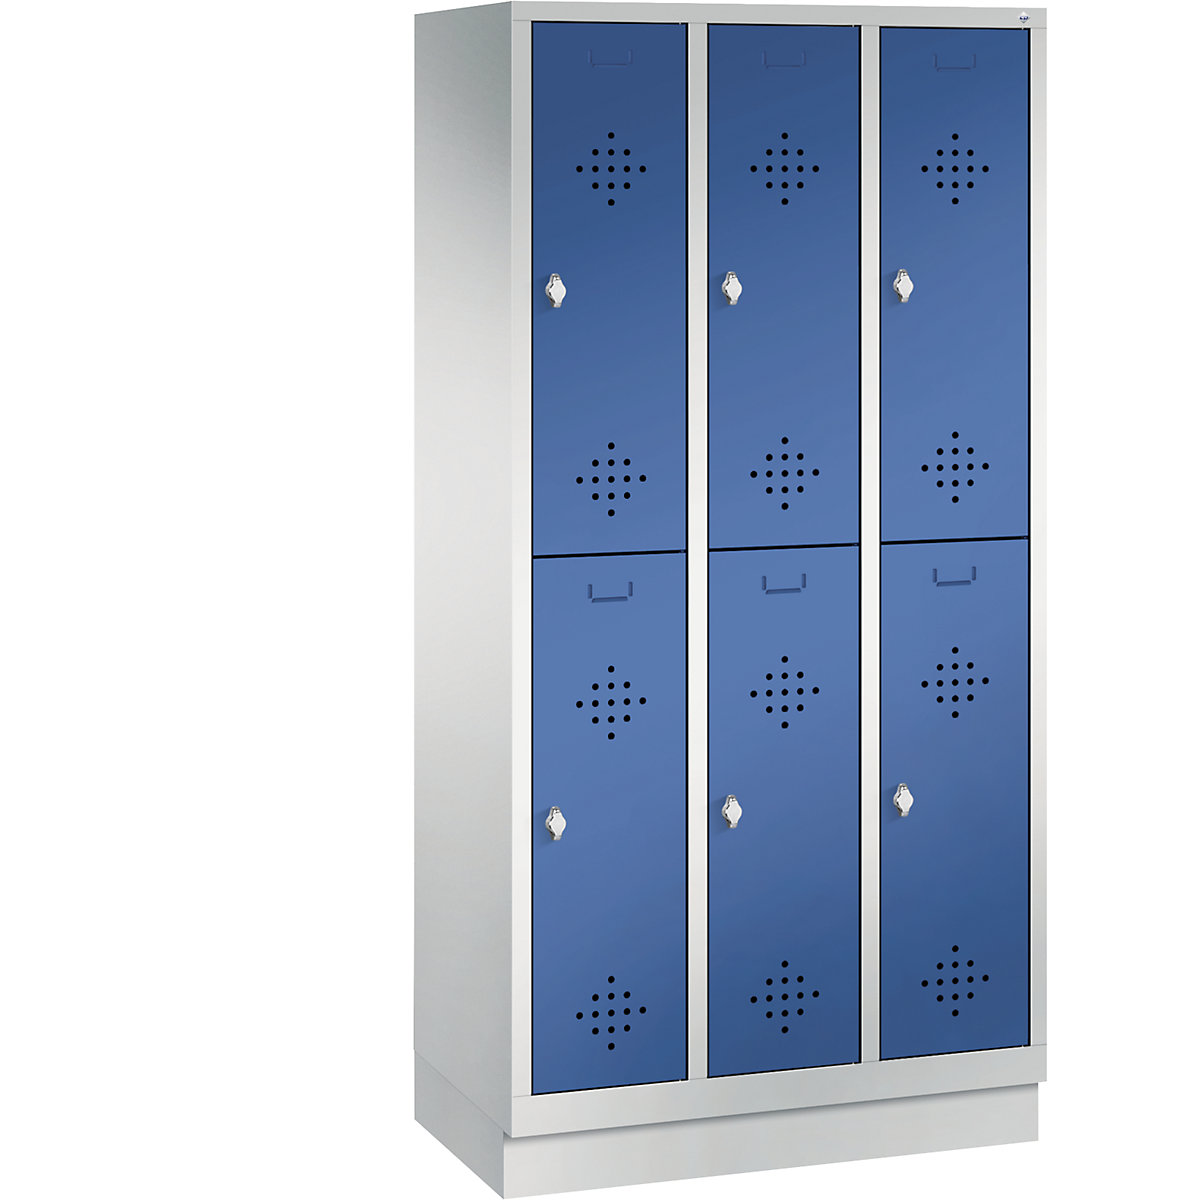 CLASSIC cloakroom locker with plinth, double tier – C+P, 3 compartments, 2 shelf compartments each, compartment width 300 mm, light grey / gentian blue-3